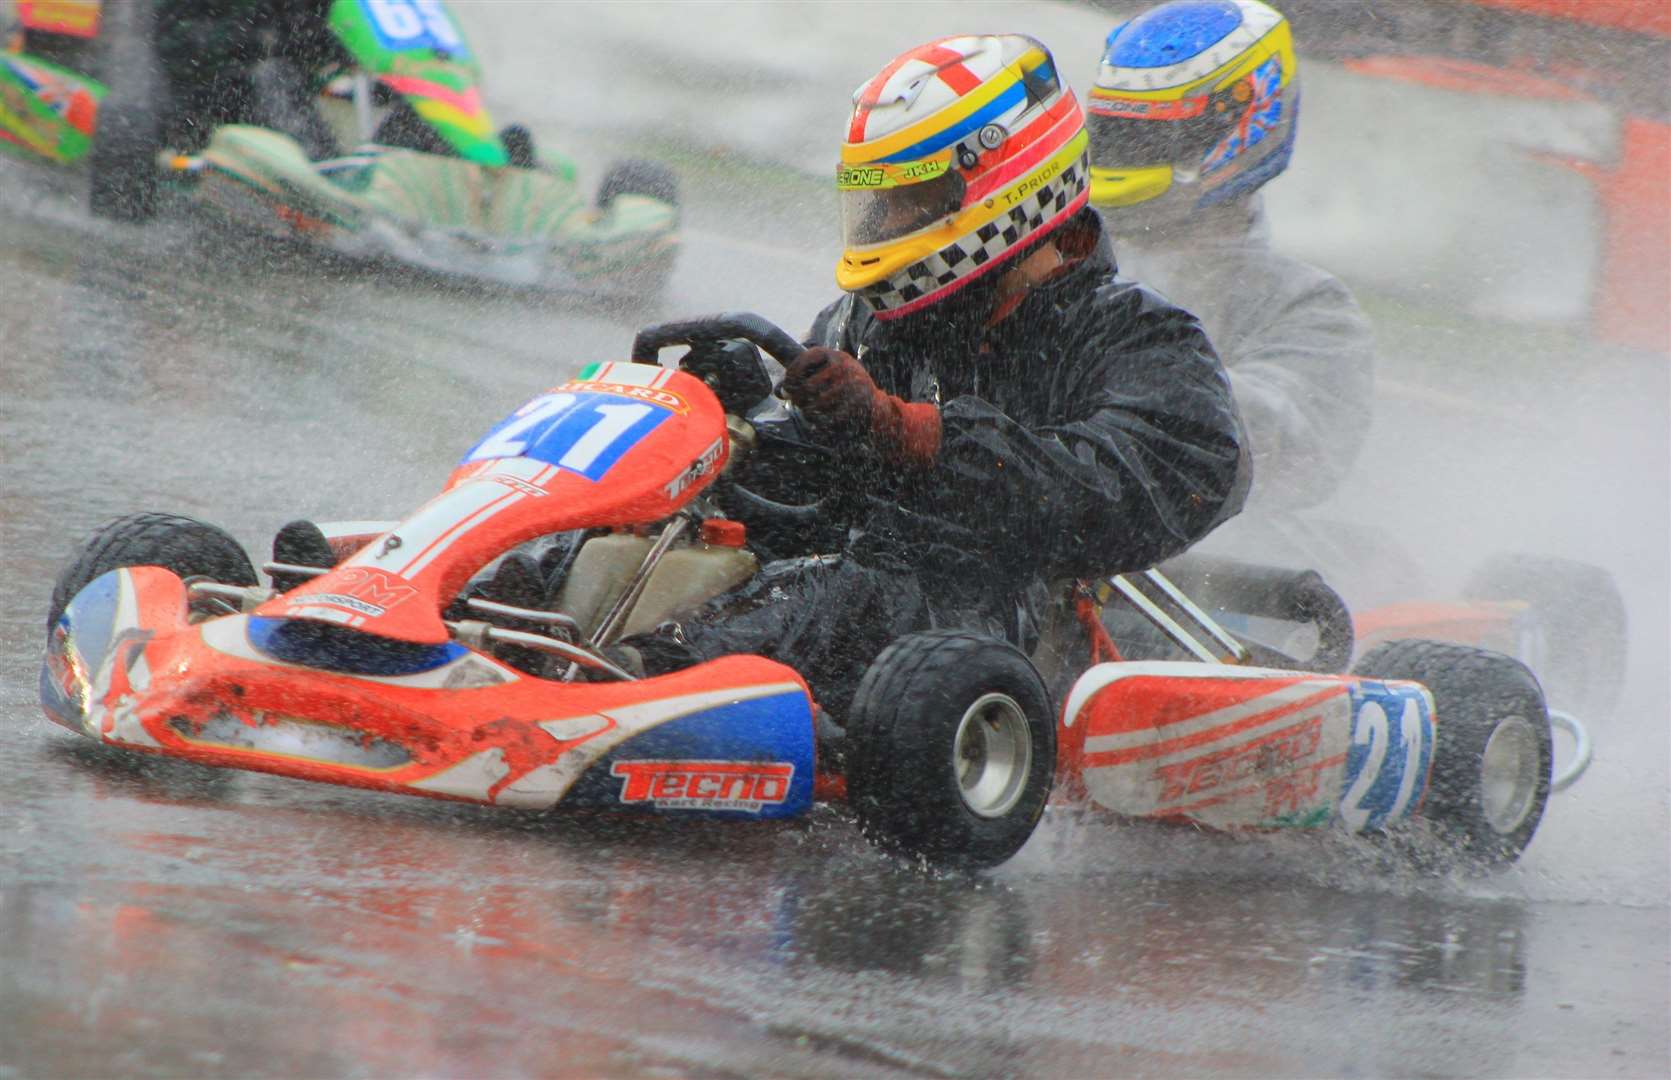 Heavy rain hit the circuit's 50th anniversary meeting in October 2013. Picture: Joe Wright